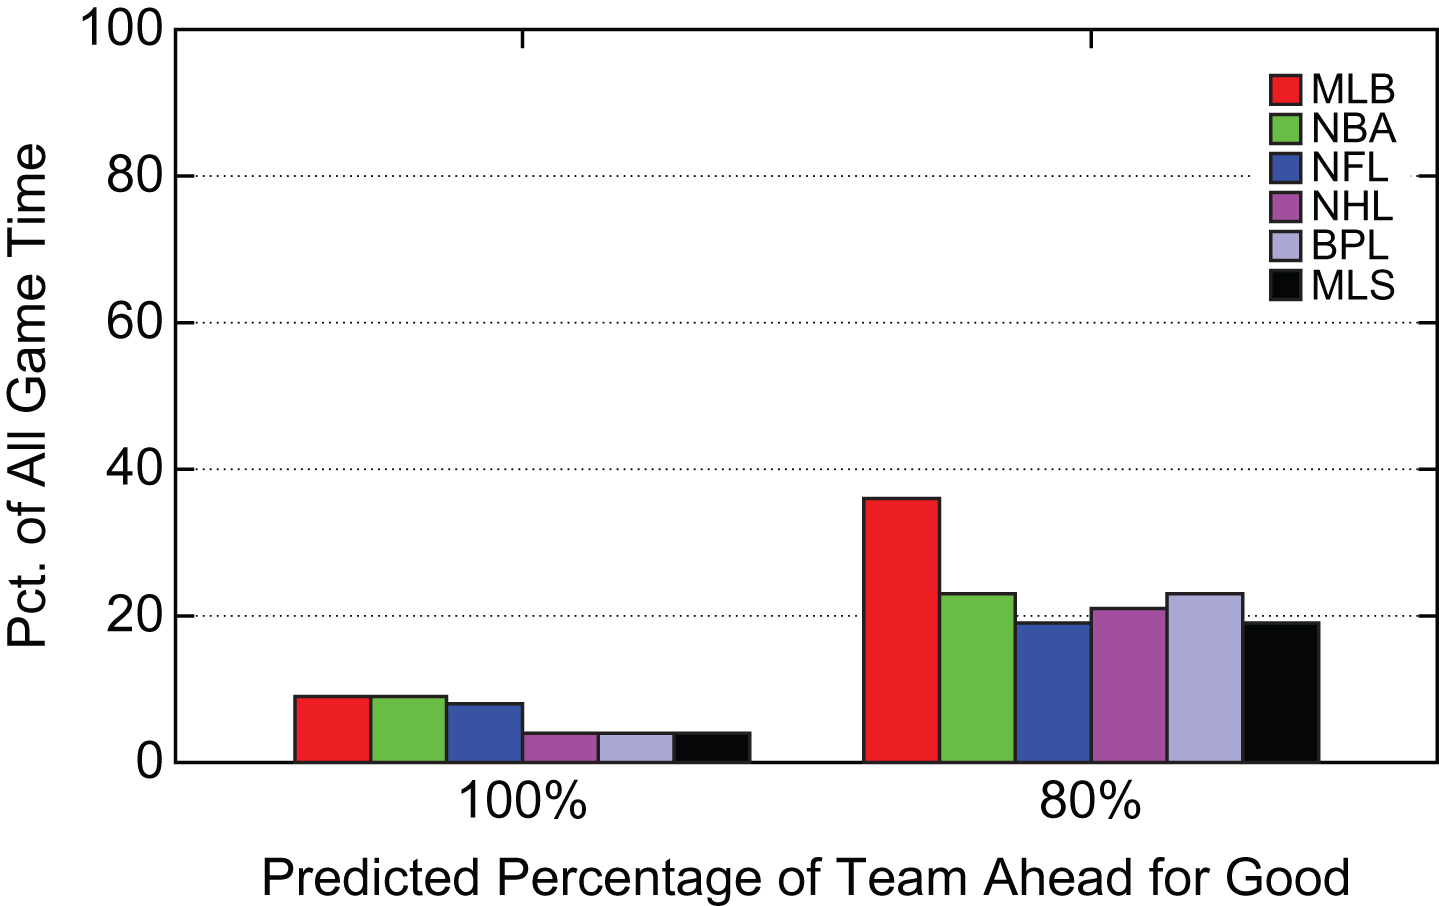 Summary Percentage of Game Time Spent at 
Different Predicted Percentages of Team Ahead for Good.